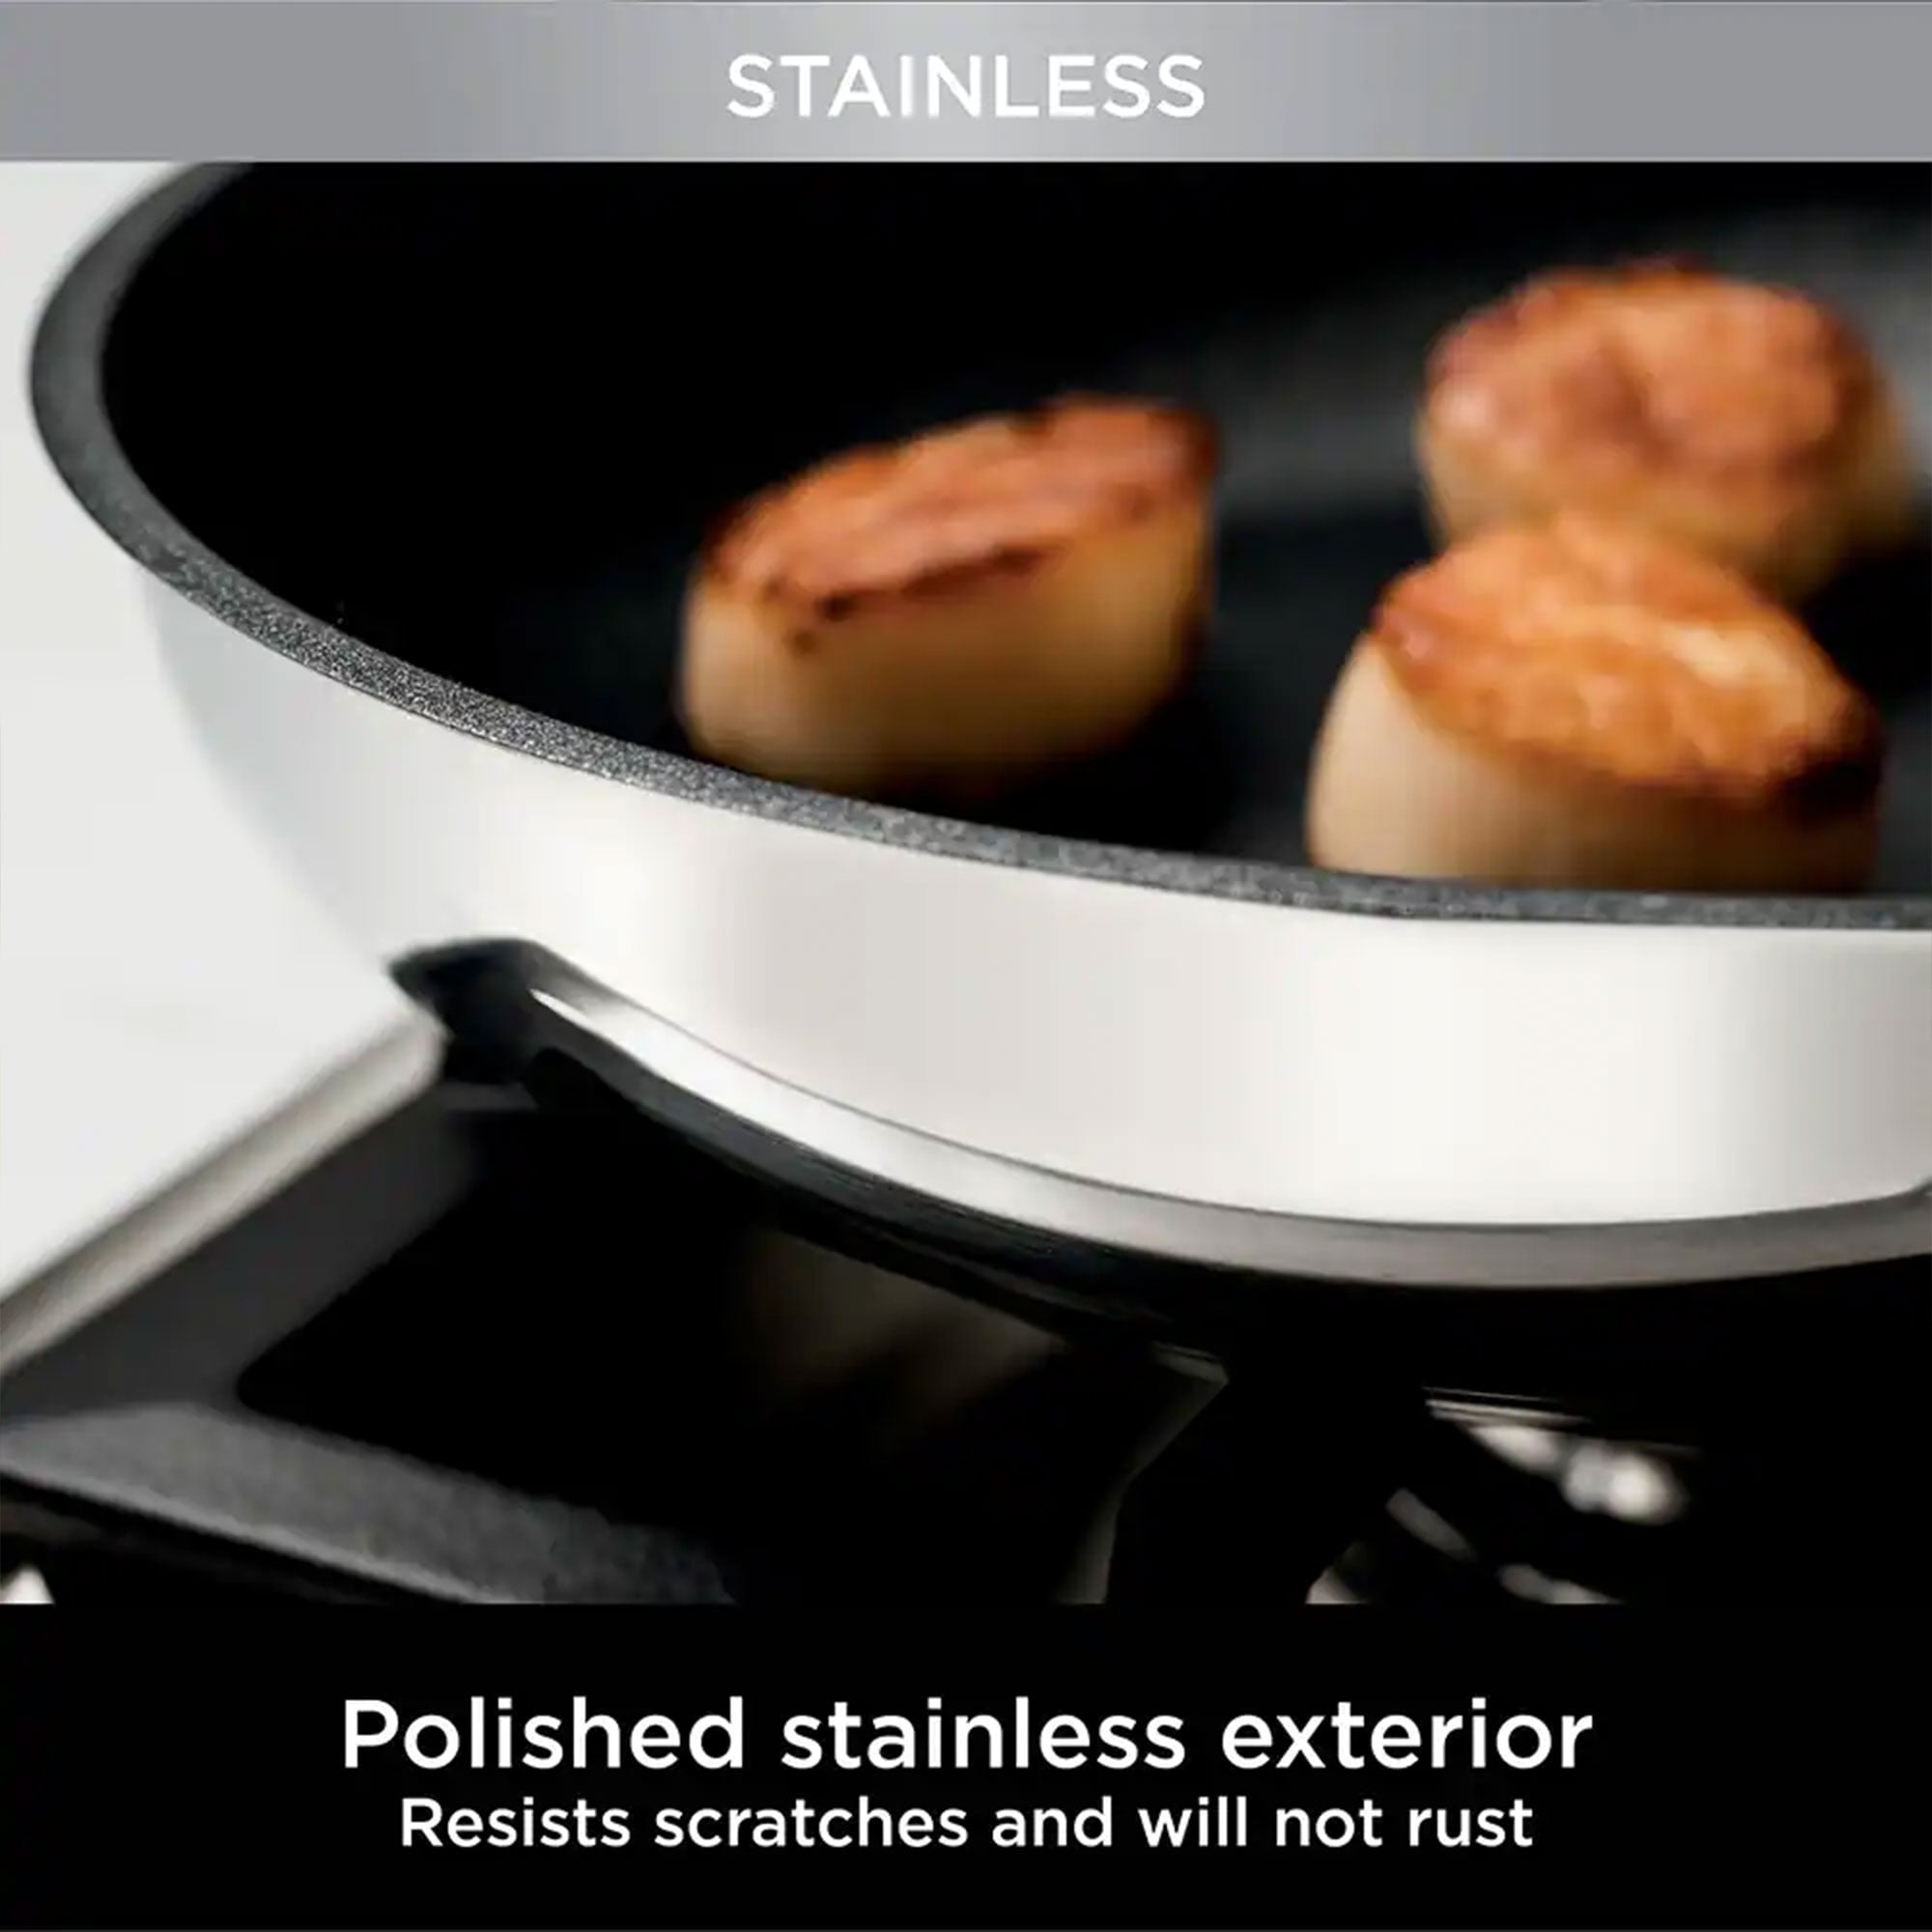 Ninja C62200 Foodi NeverStick Stainless 10.25-Inch & 12-Inch Fry Pan Set,  Polished Stainless-Steel Exterior, Nonstick, Durable & Oven Safe to 500°F